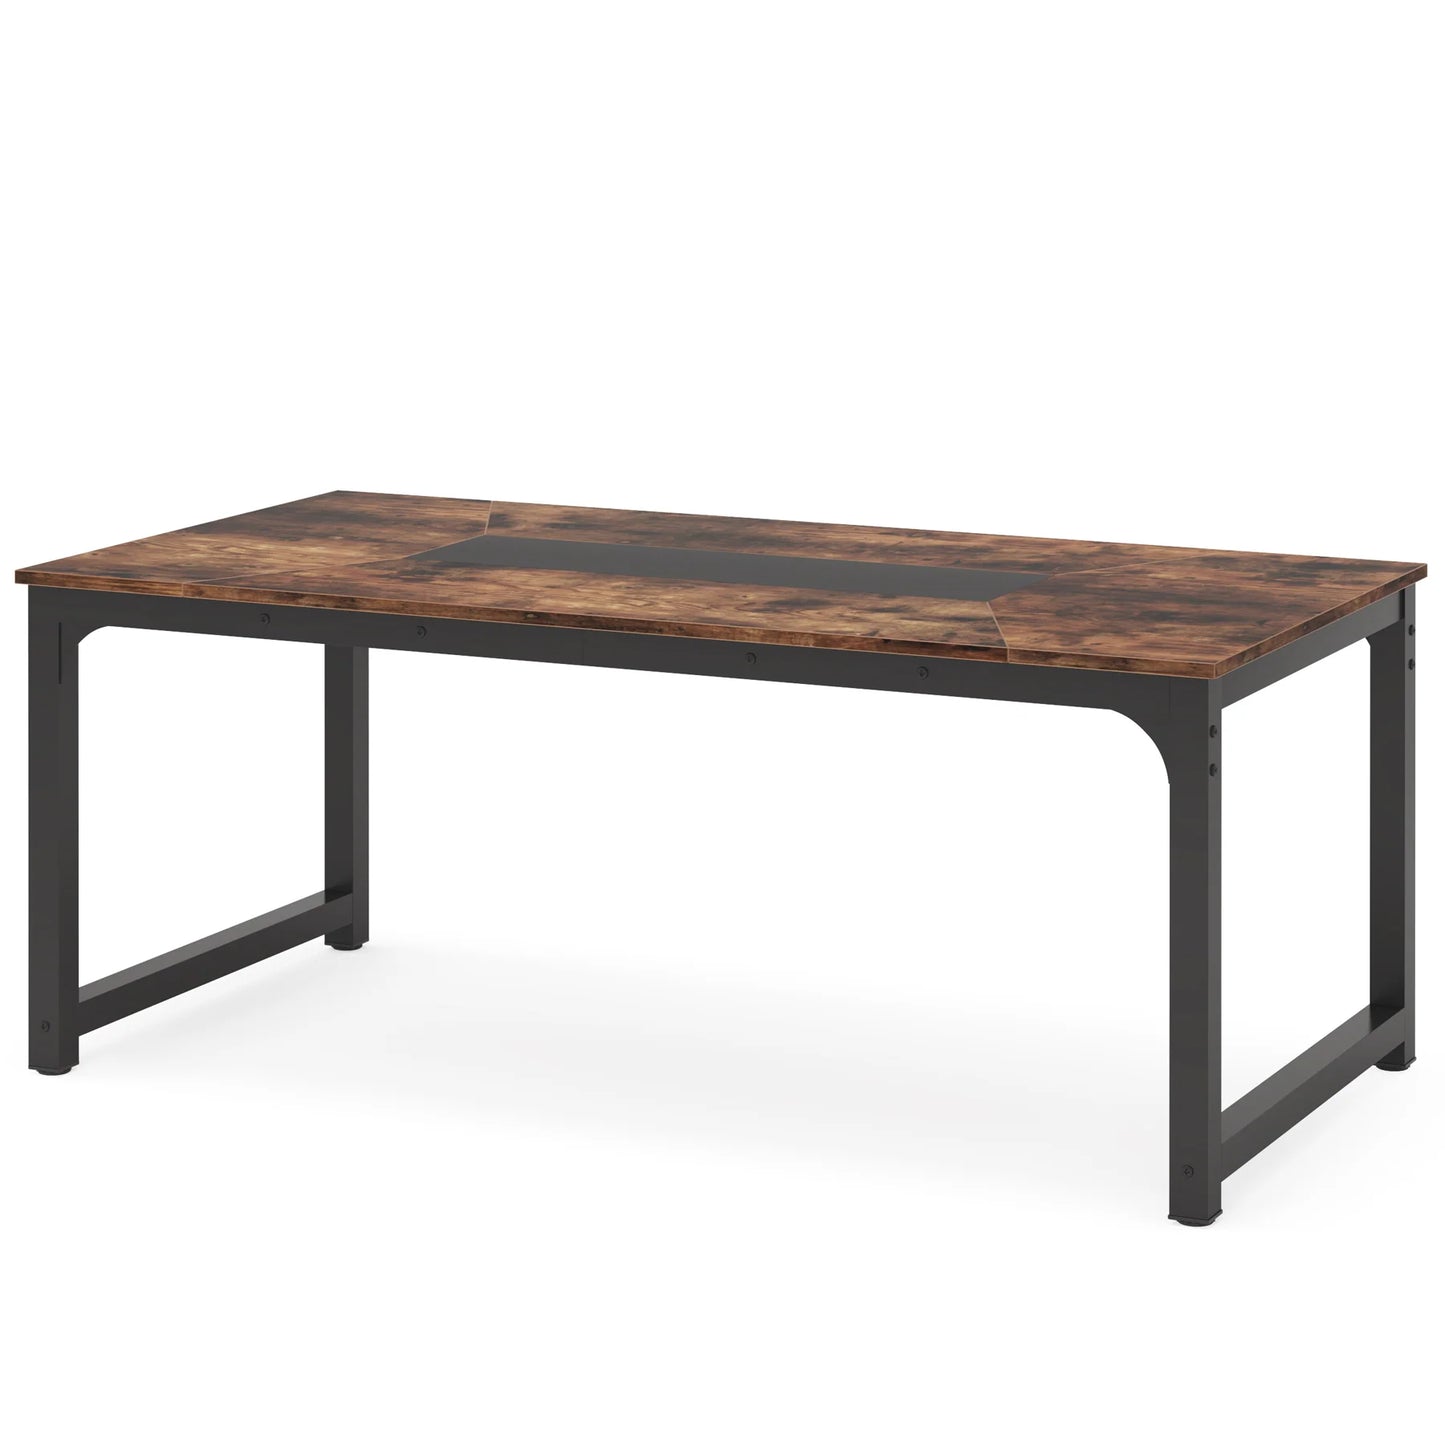 Conference Table, 6FT Rectangular Meeting Seminar Table